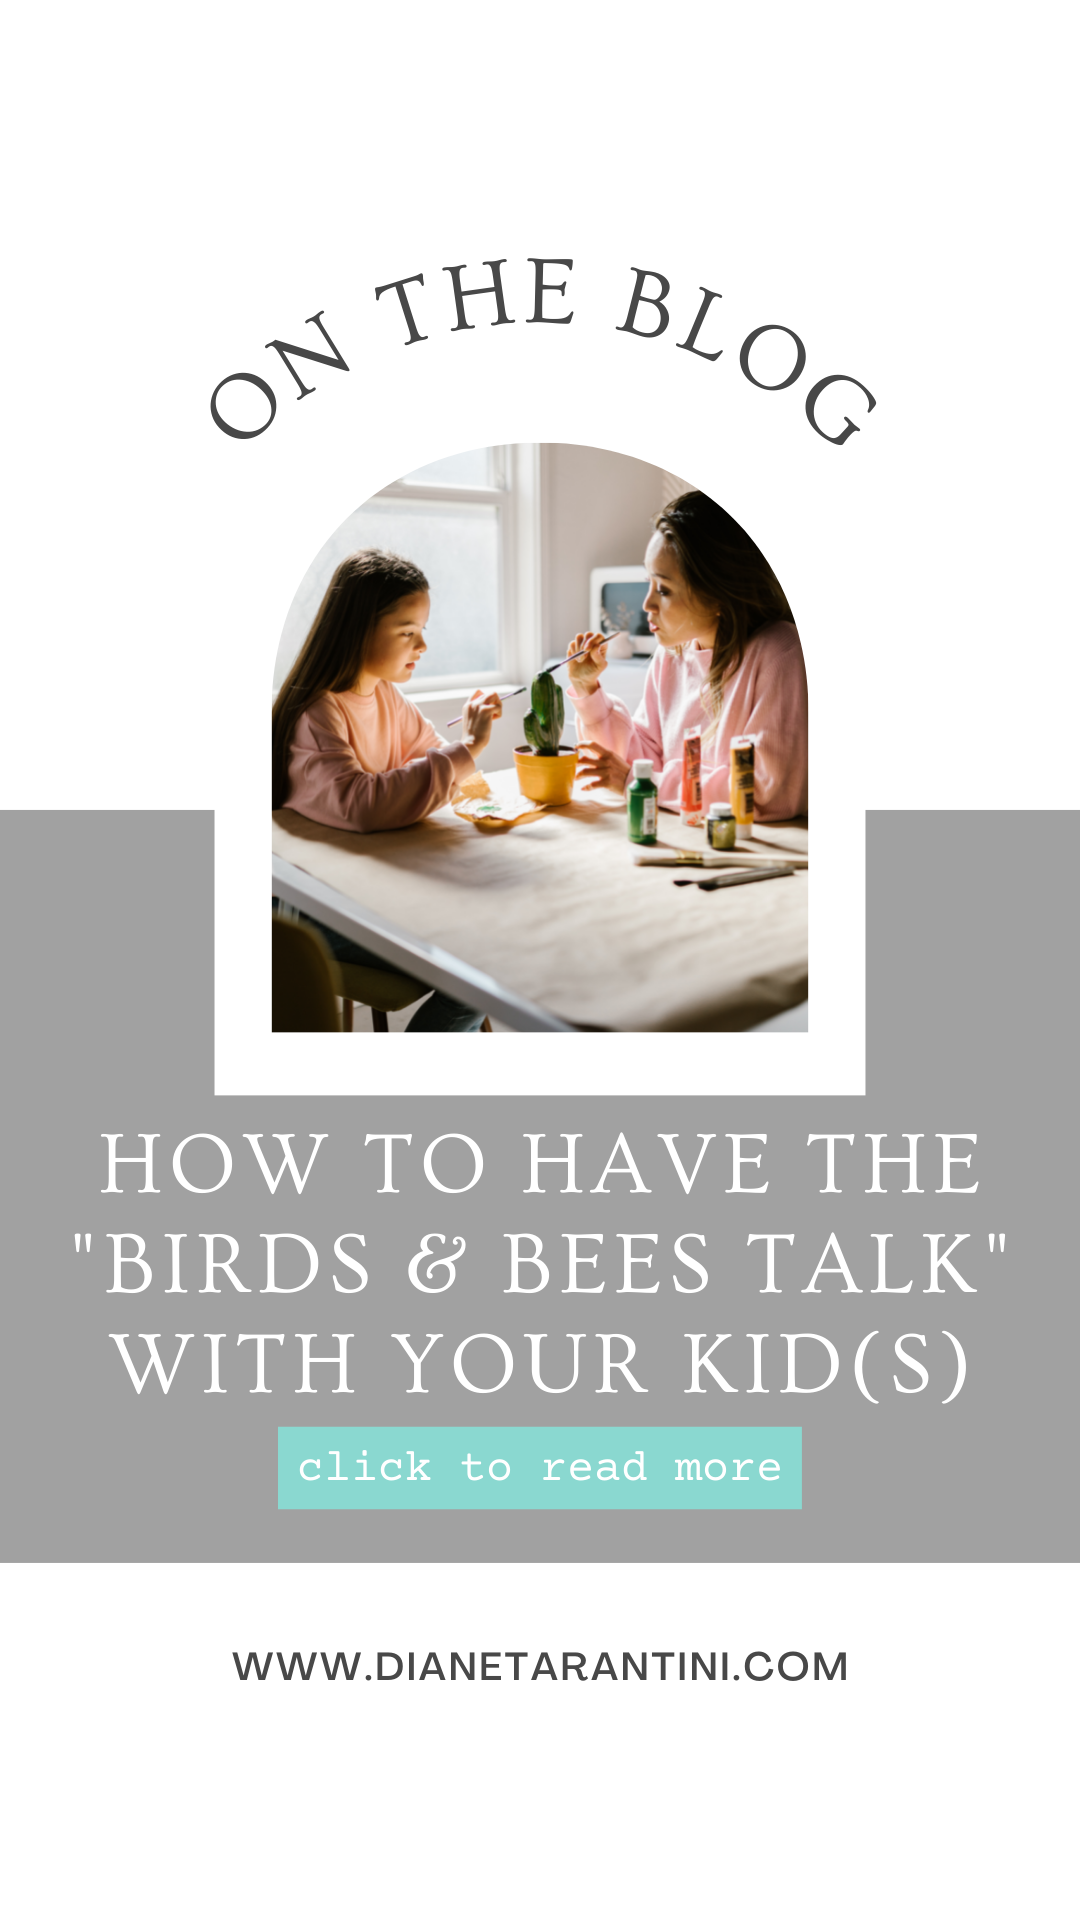 How to Have the "Birds & Bees Talk" with your Kids